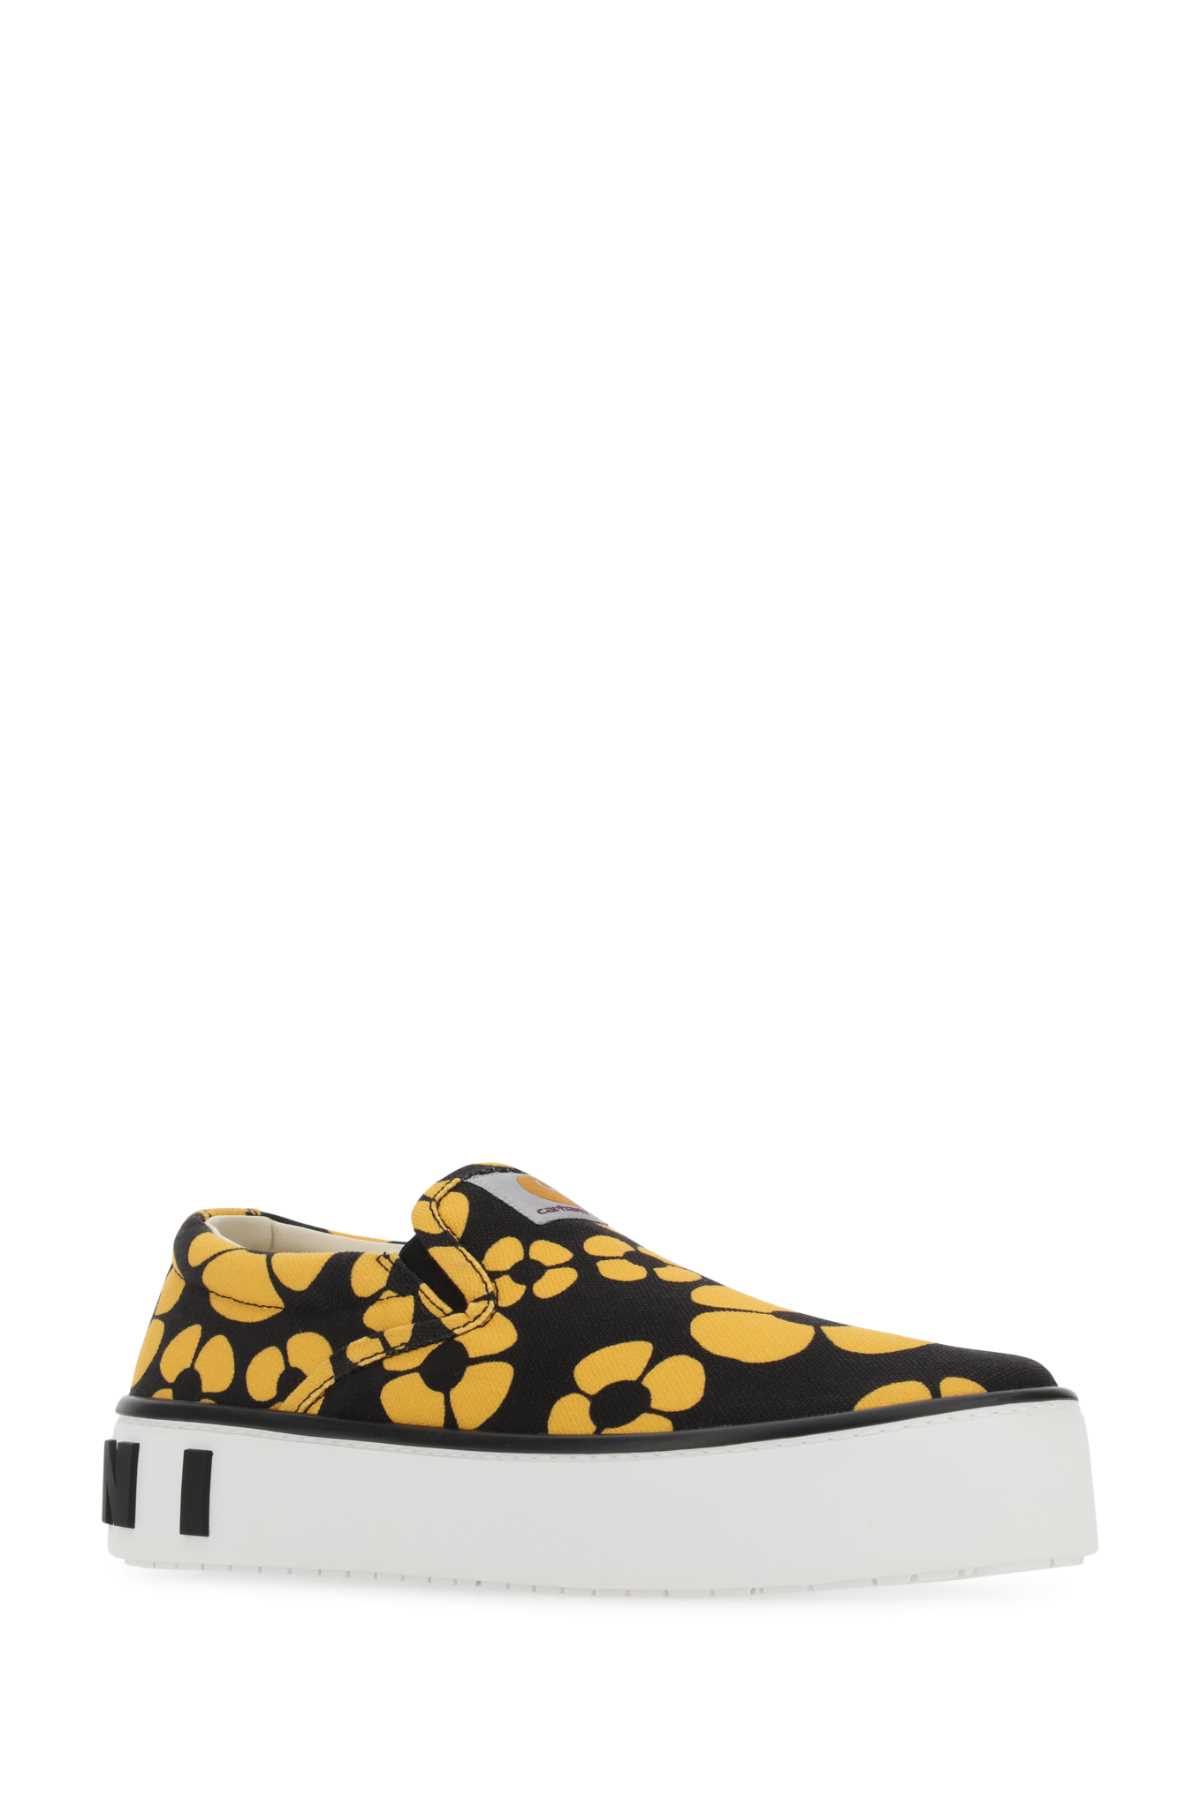 Marni Printed Canvas Slip Ons In Zo266